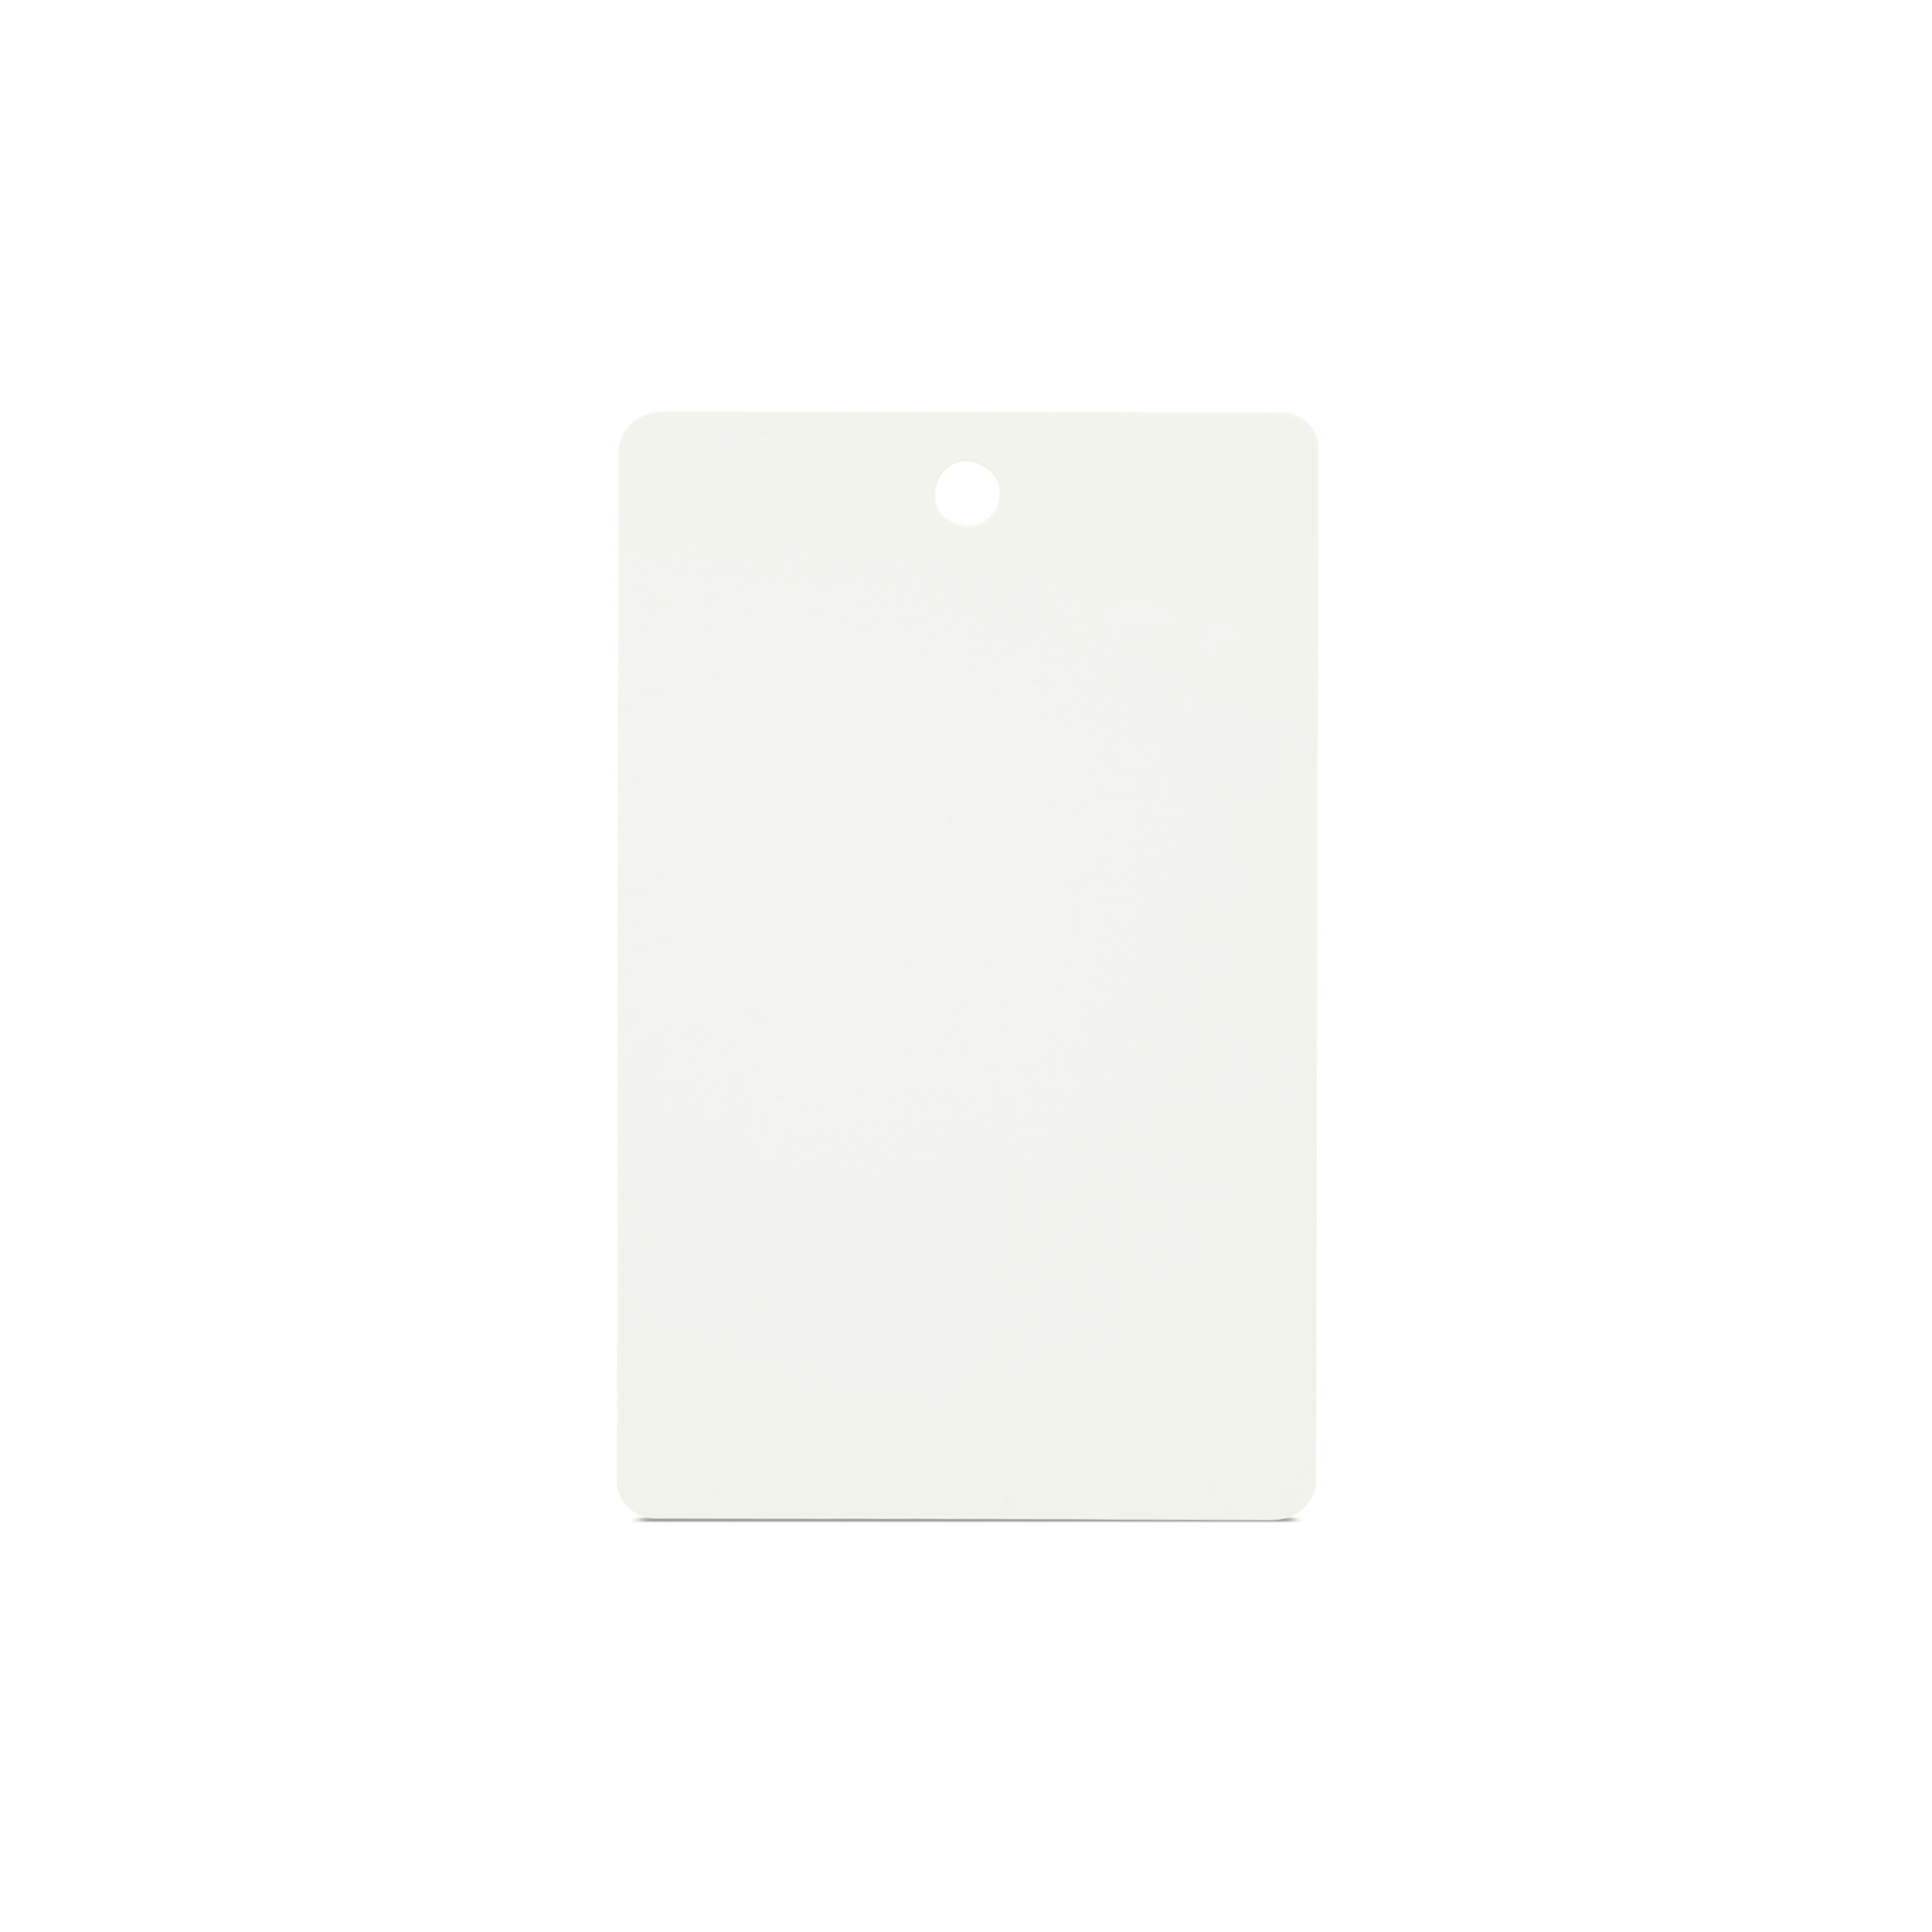 NFC Card PVC - 85,6 x 54 mm - NTAG213 - 180 Byte - white - portrait perforated